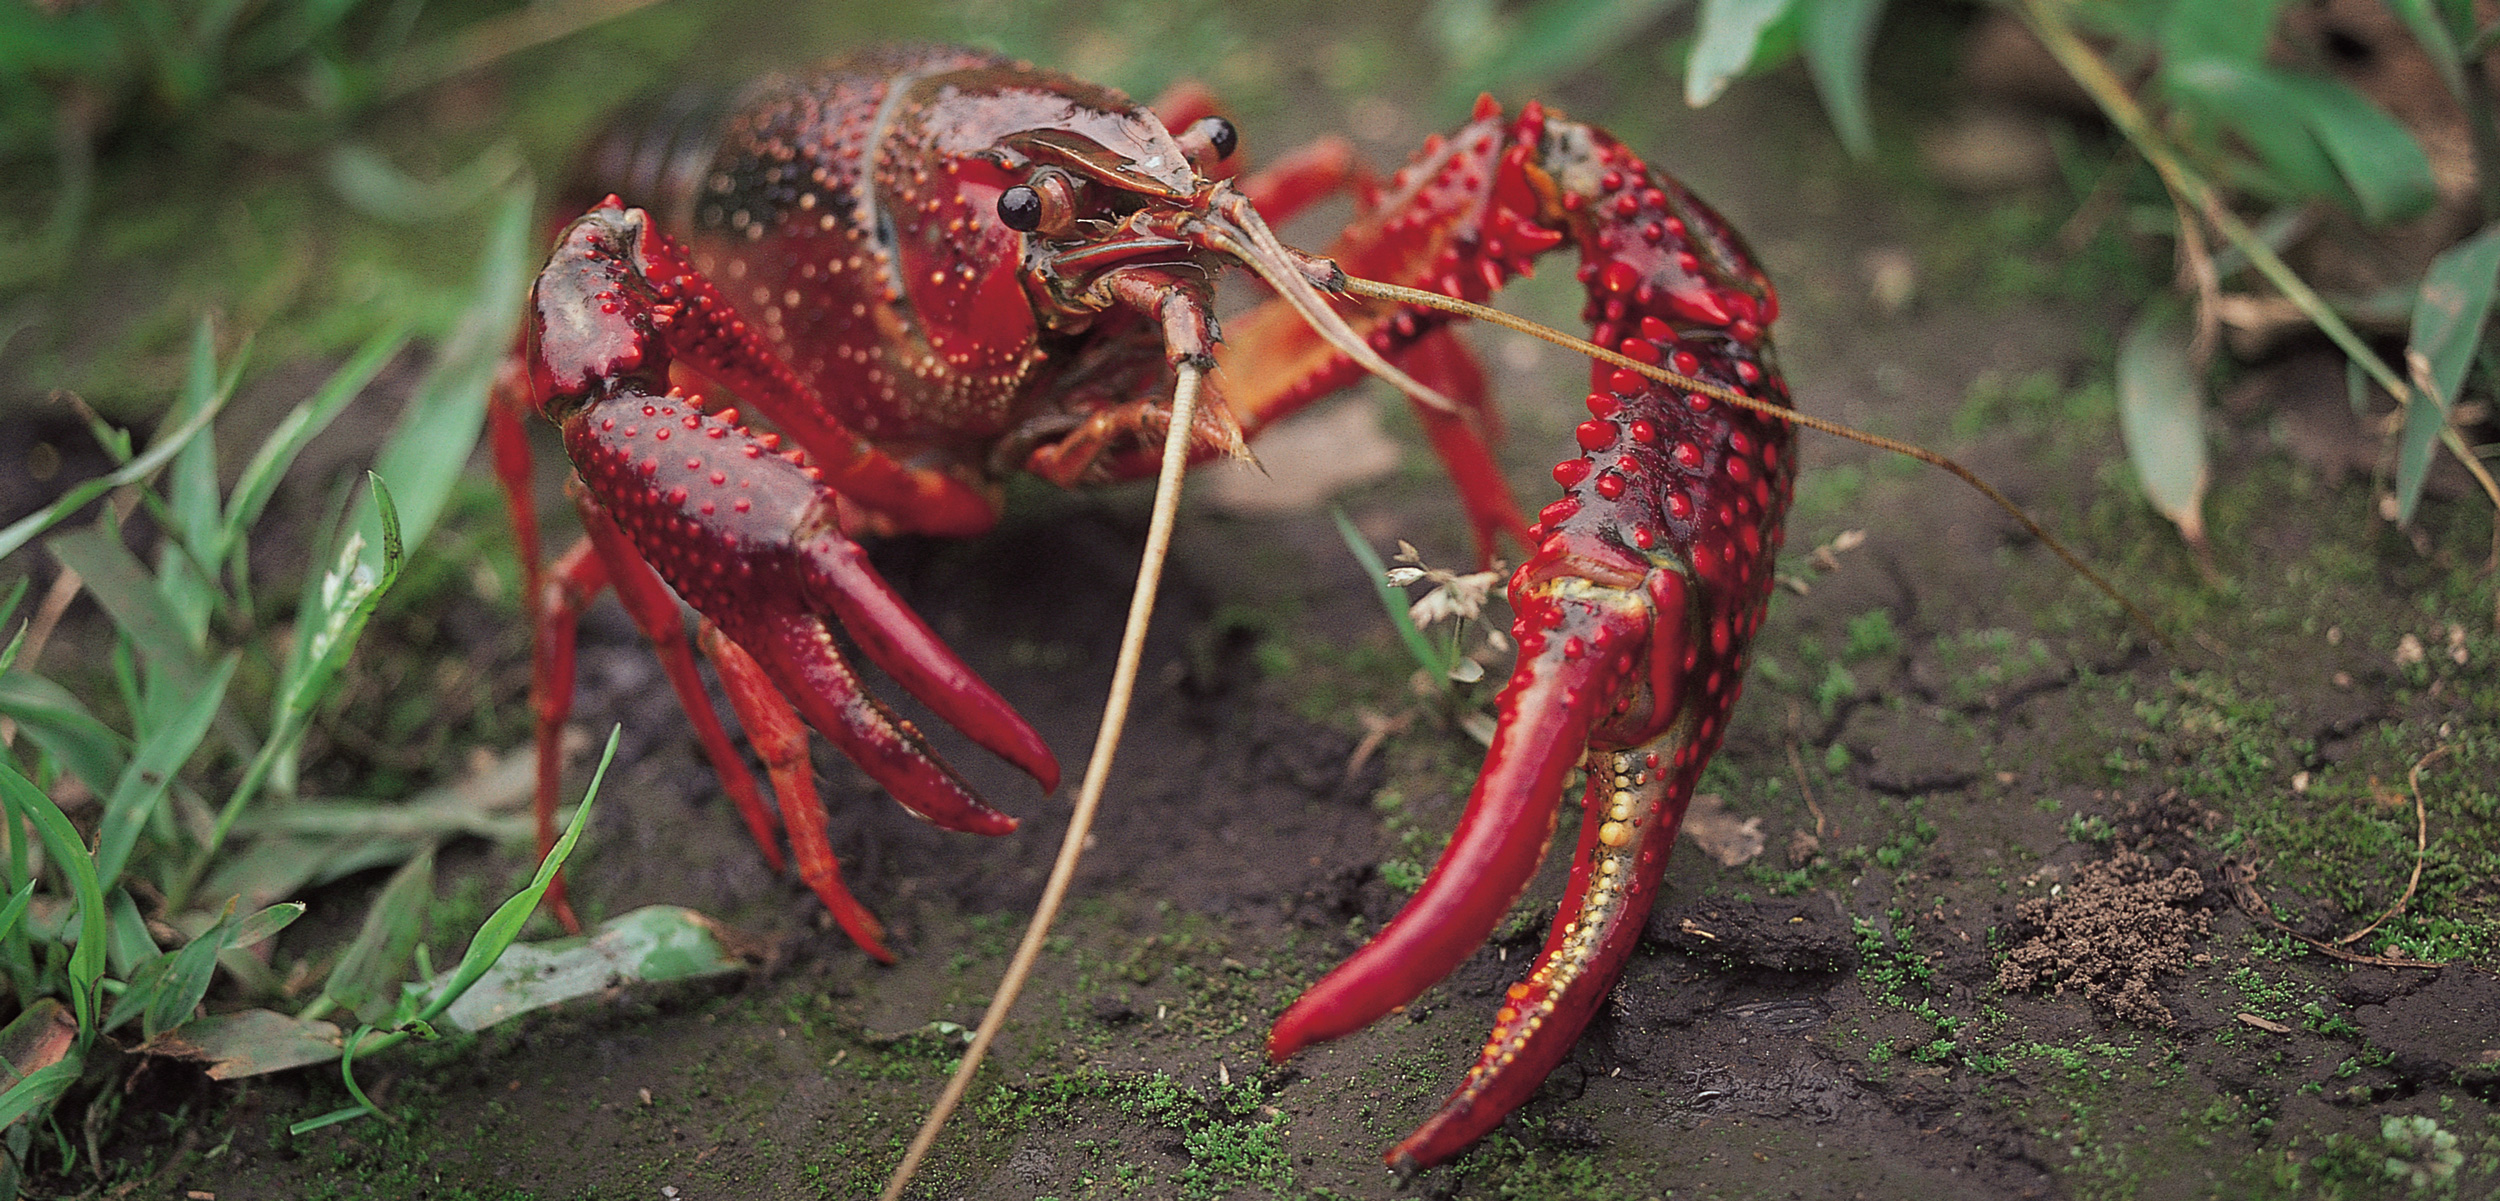 The red swamp is an invasive species of crayfish in Pine Lake, near Seattle, Washington. Photo by Modoki Masuda/Minden Pictures